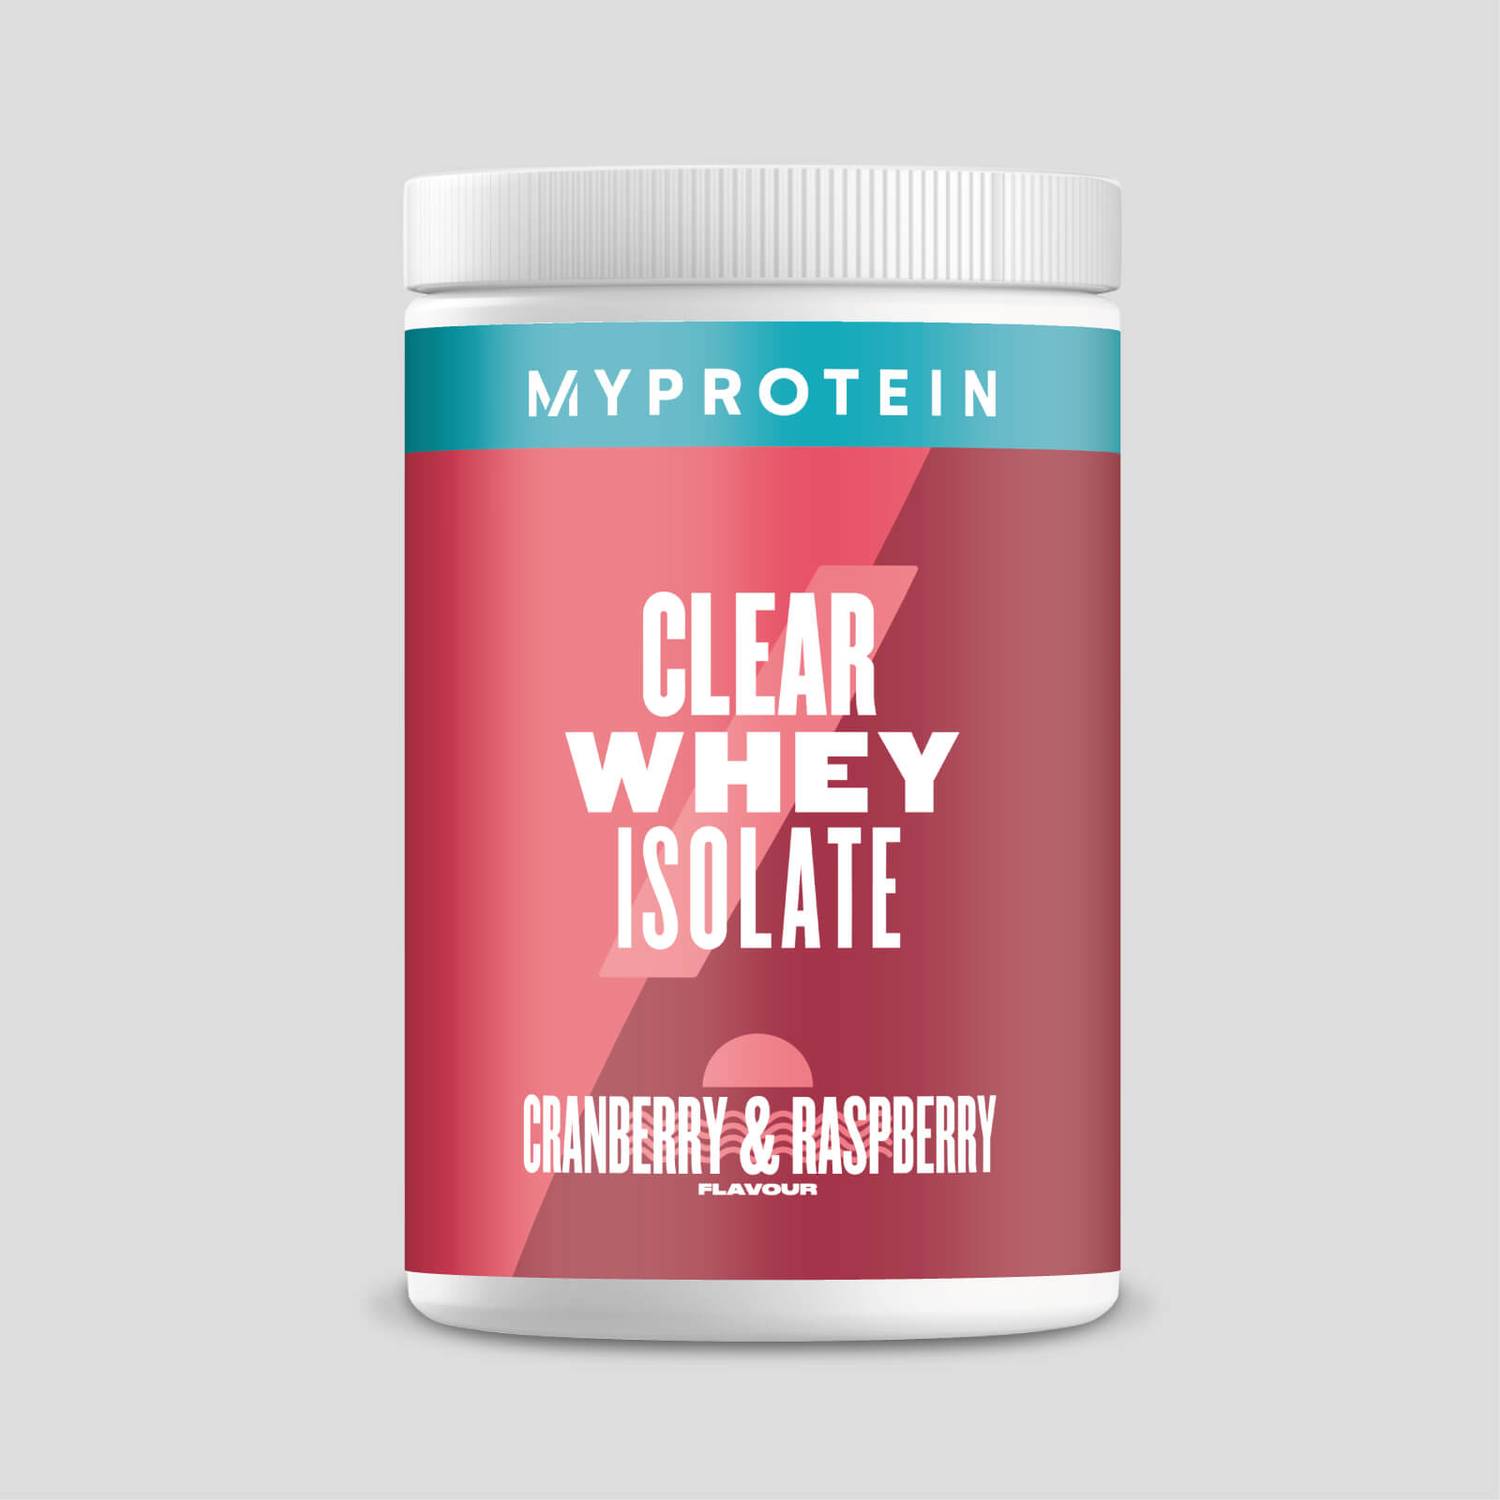 MYPROTEIN CLEAR WHEY ISOLATE (20 PORTIONEN DOSE)